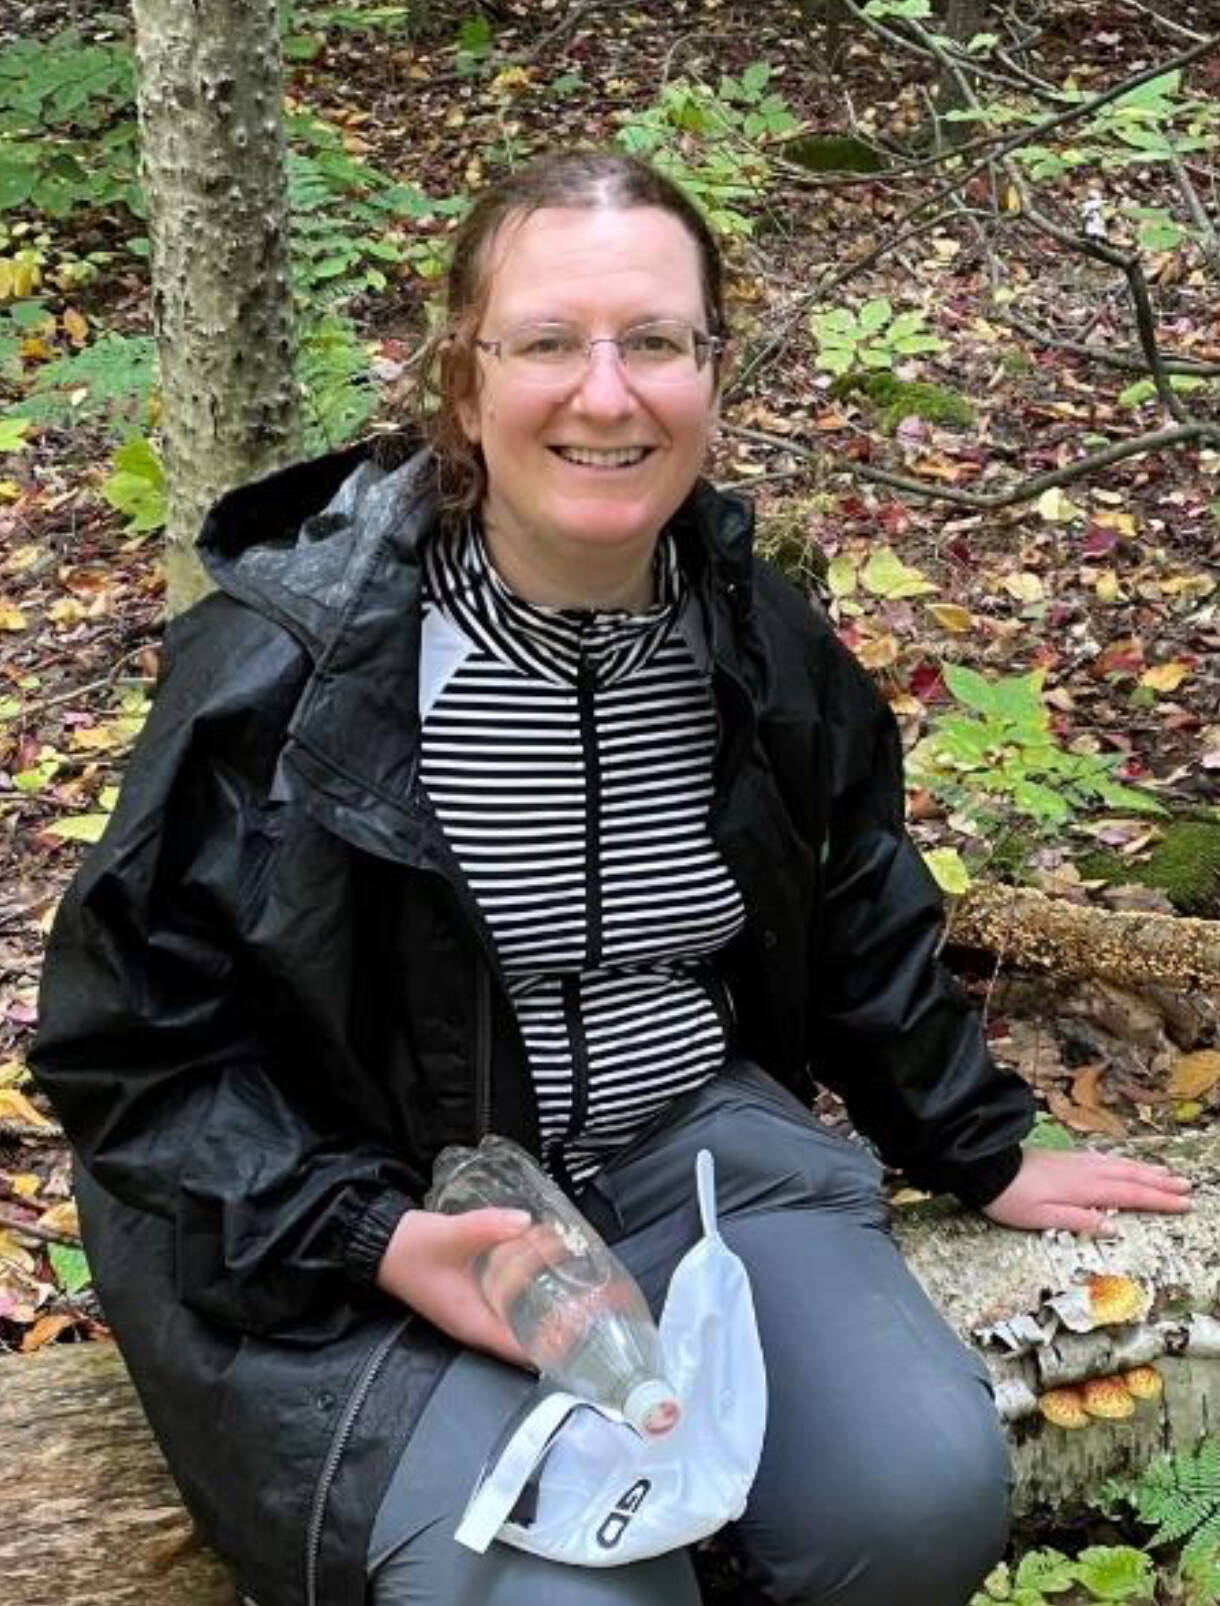 Submitted photo / Missing hiker Laura Macke is known to hike in a black and white striped shirt, black rain jacket and maroon colored, puffy jacket. She uses a green Nemo tent.